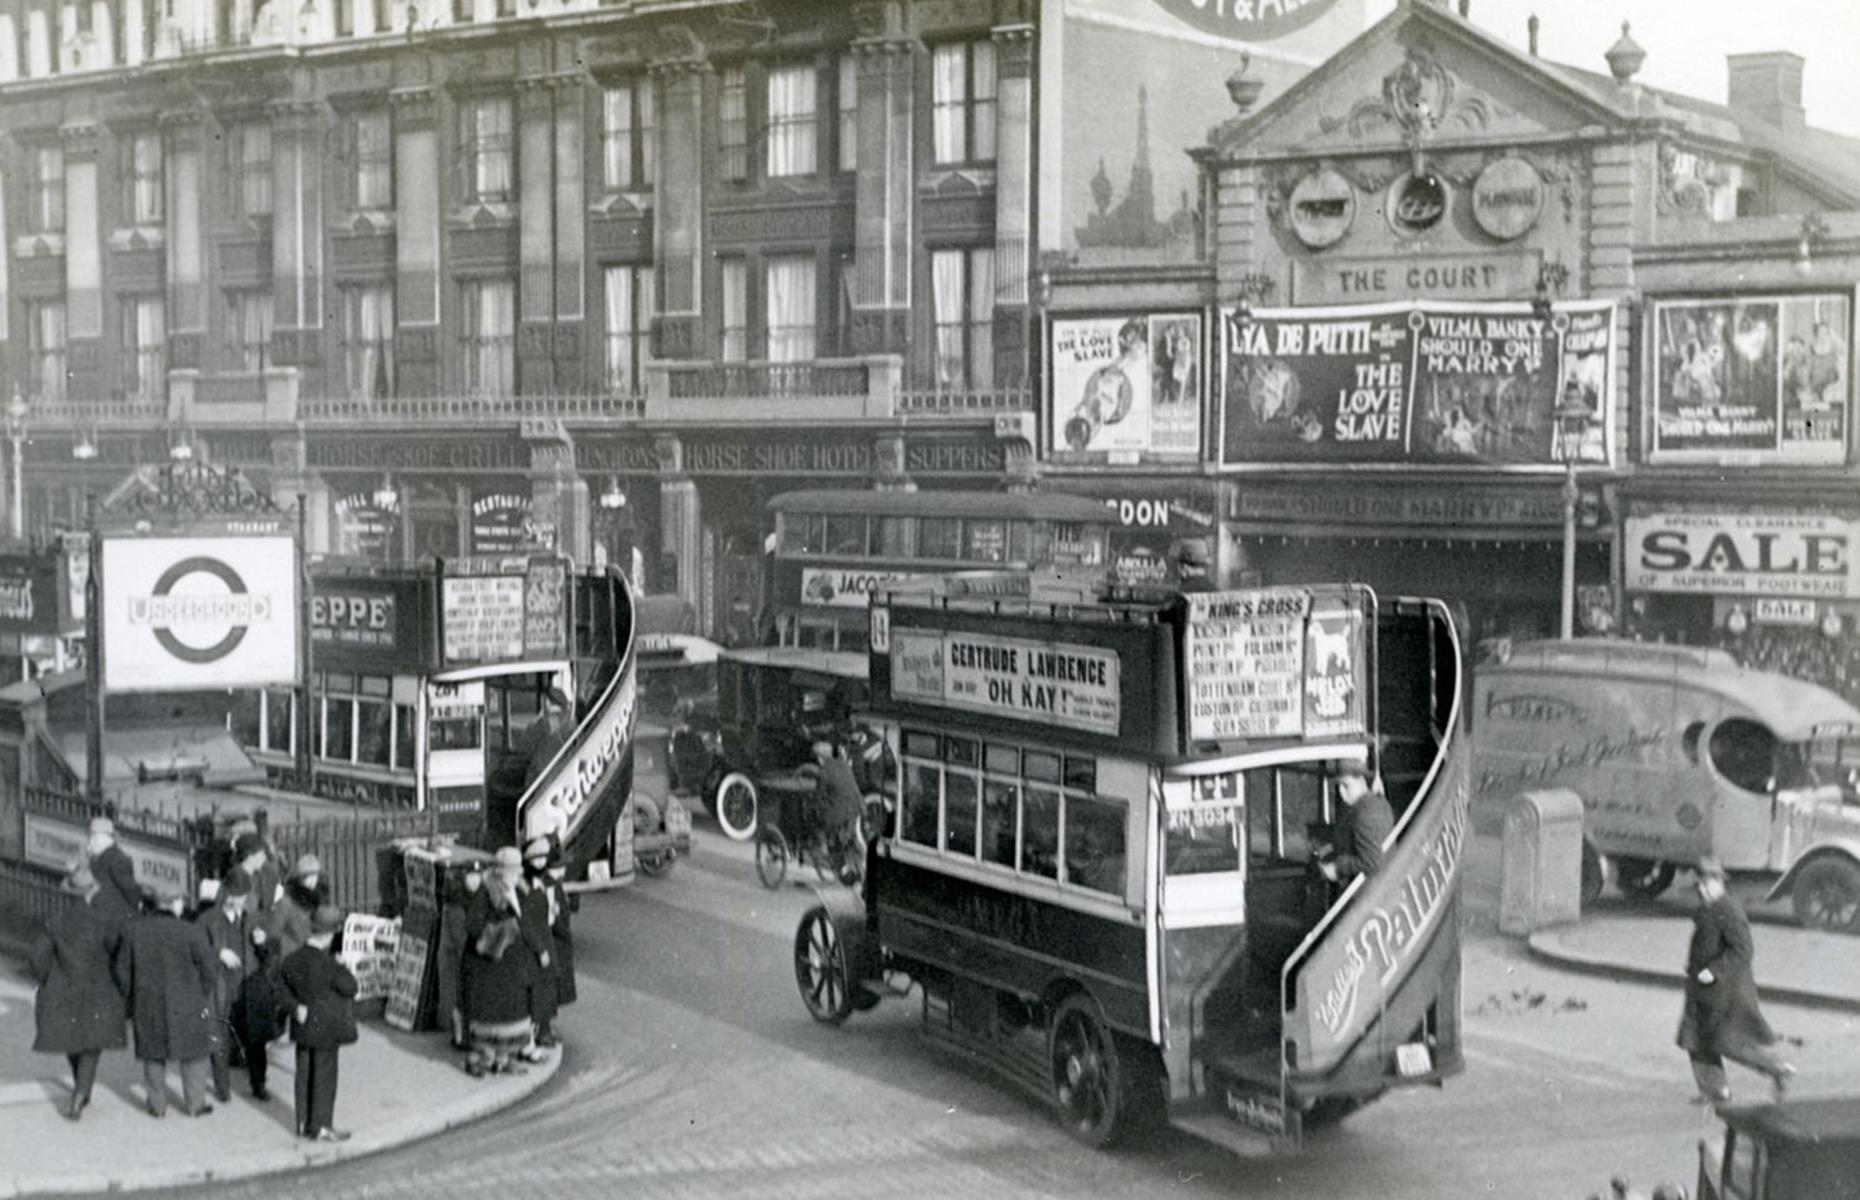 Nowadays, visitors to London will see the famous tube symbol – a bold red circle with a blue line striking through it – all over town. And the 'roundel', as it's known, is more than 100 years-old. It was first introduced in 1908, and you can spot it in this 1920s photo showing the exterior of Tottenham Court Road station.